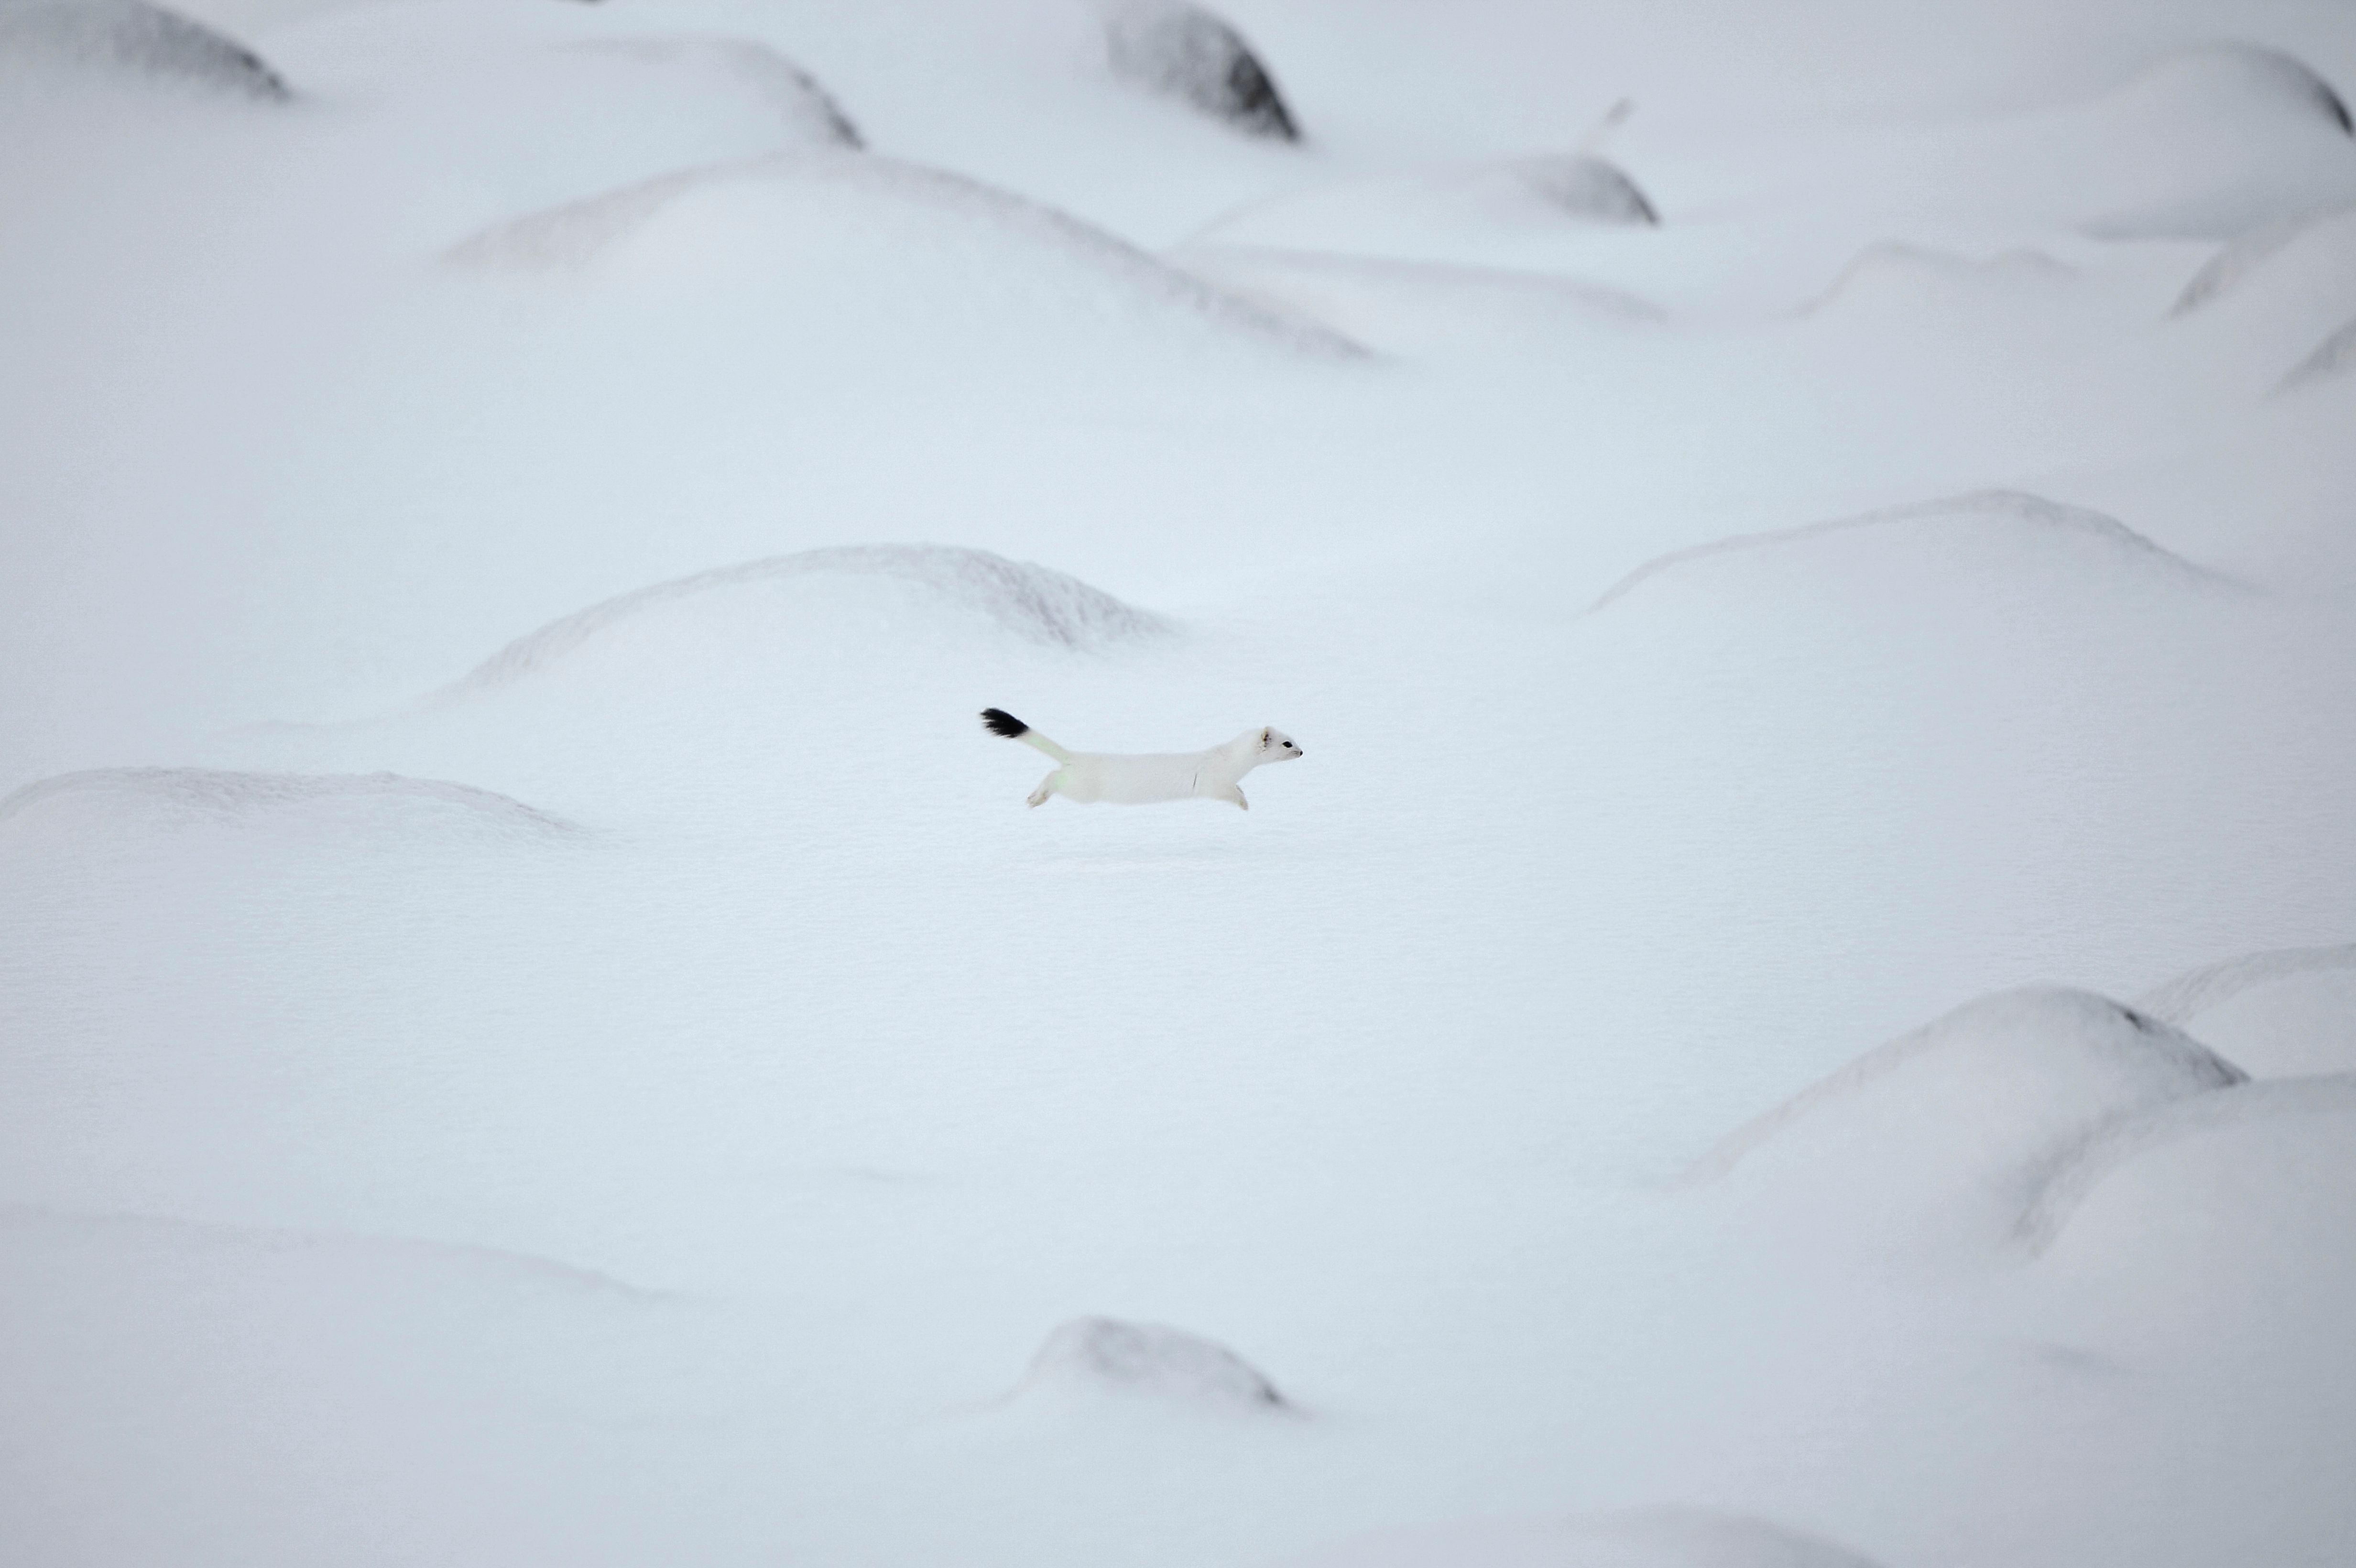 An arctic weasel runs on the snowy beach of Unstad, Lofoten Island, in the Arctic Circle, on March 8, 2016.